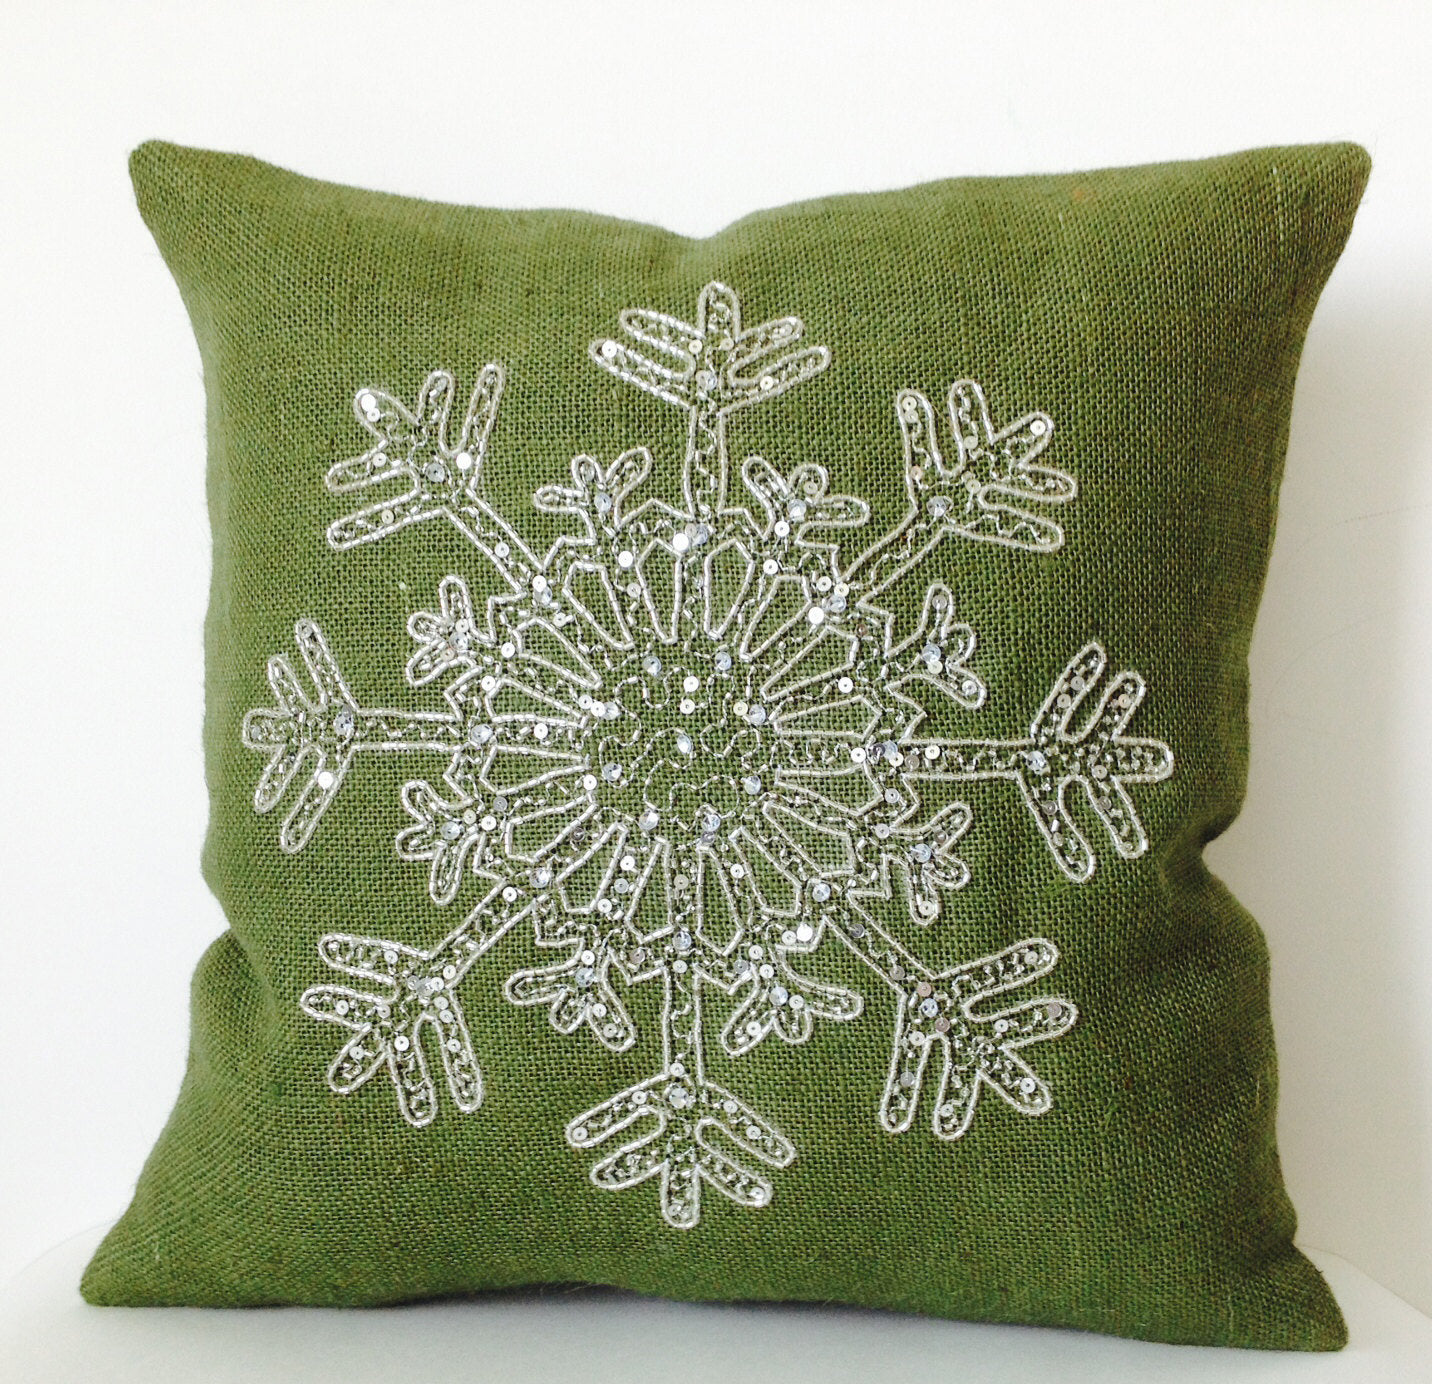 Amore Beaute green burlap pillow cover has shimmering sequin and beads jeweled adorned to create a luxuriously magical Christmas pillow!